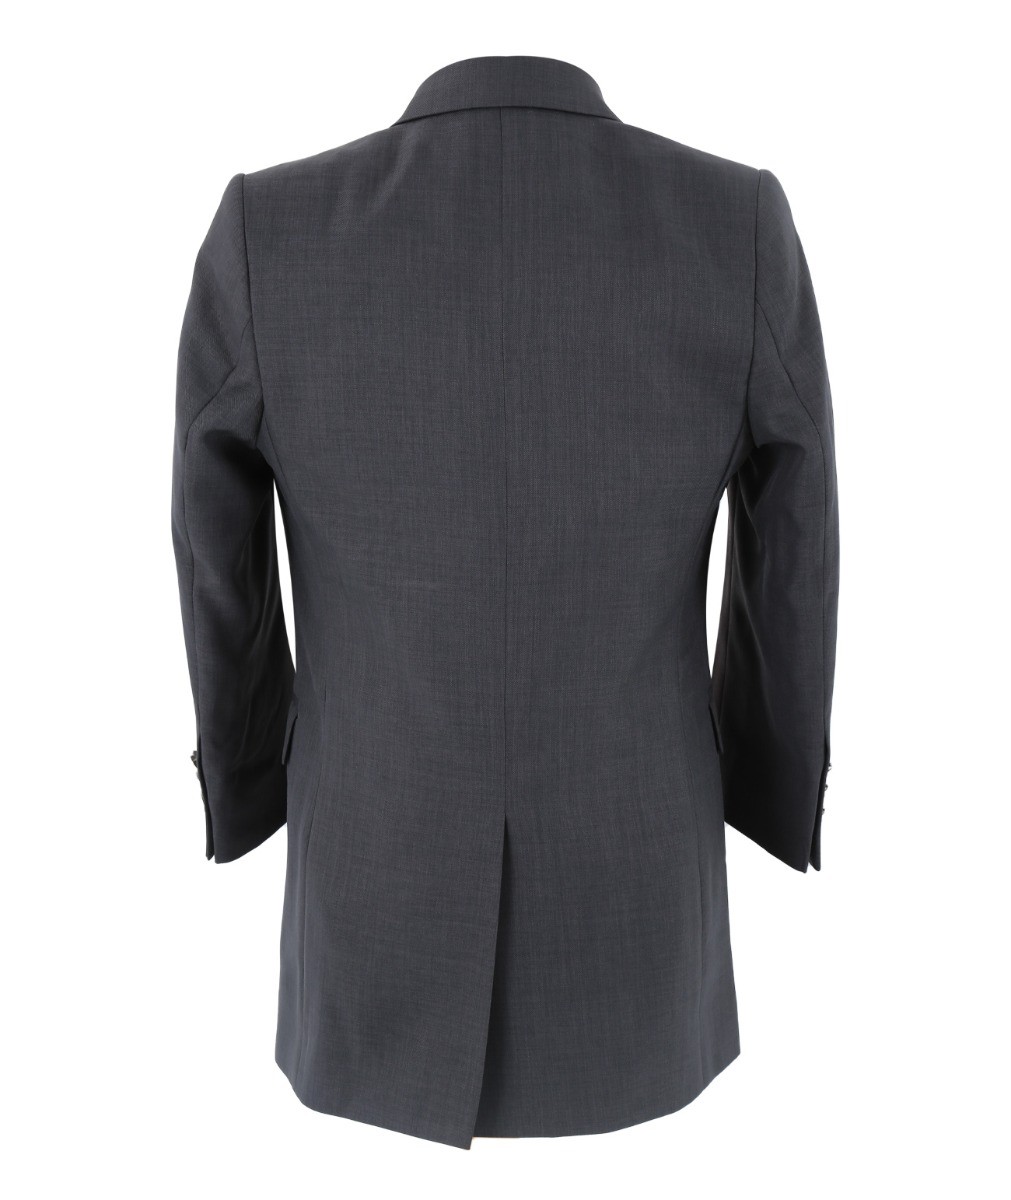 Boys Complete Tail Morning Suit - Charcoal Grey - Ivory